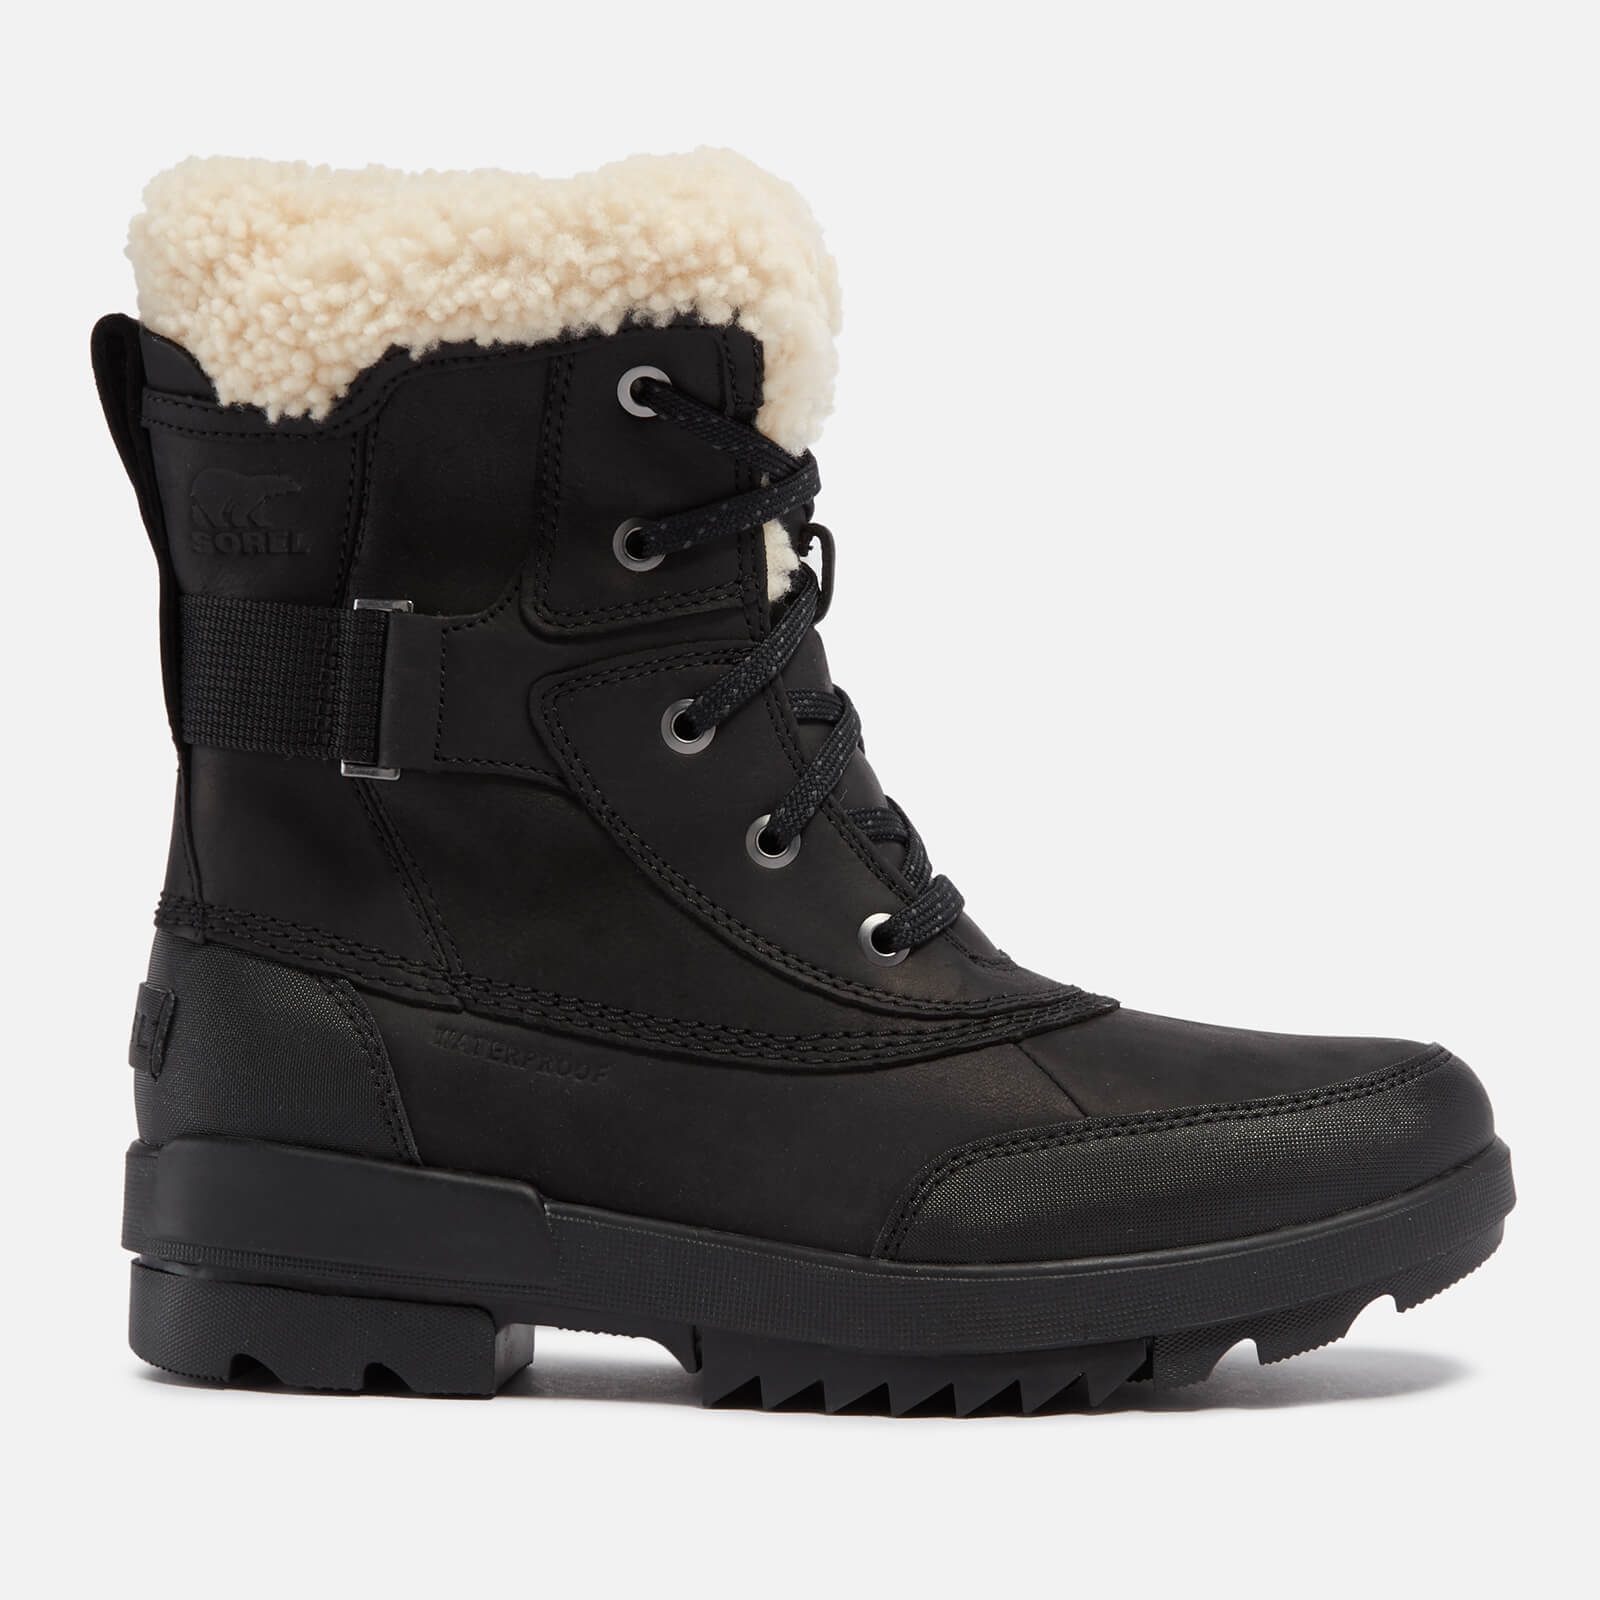 Sorel Torino Ii Parc Shearling, Rubber and Leather Boots - UK 4